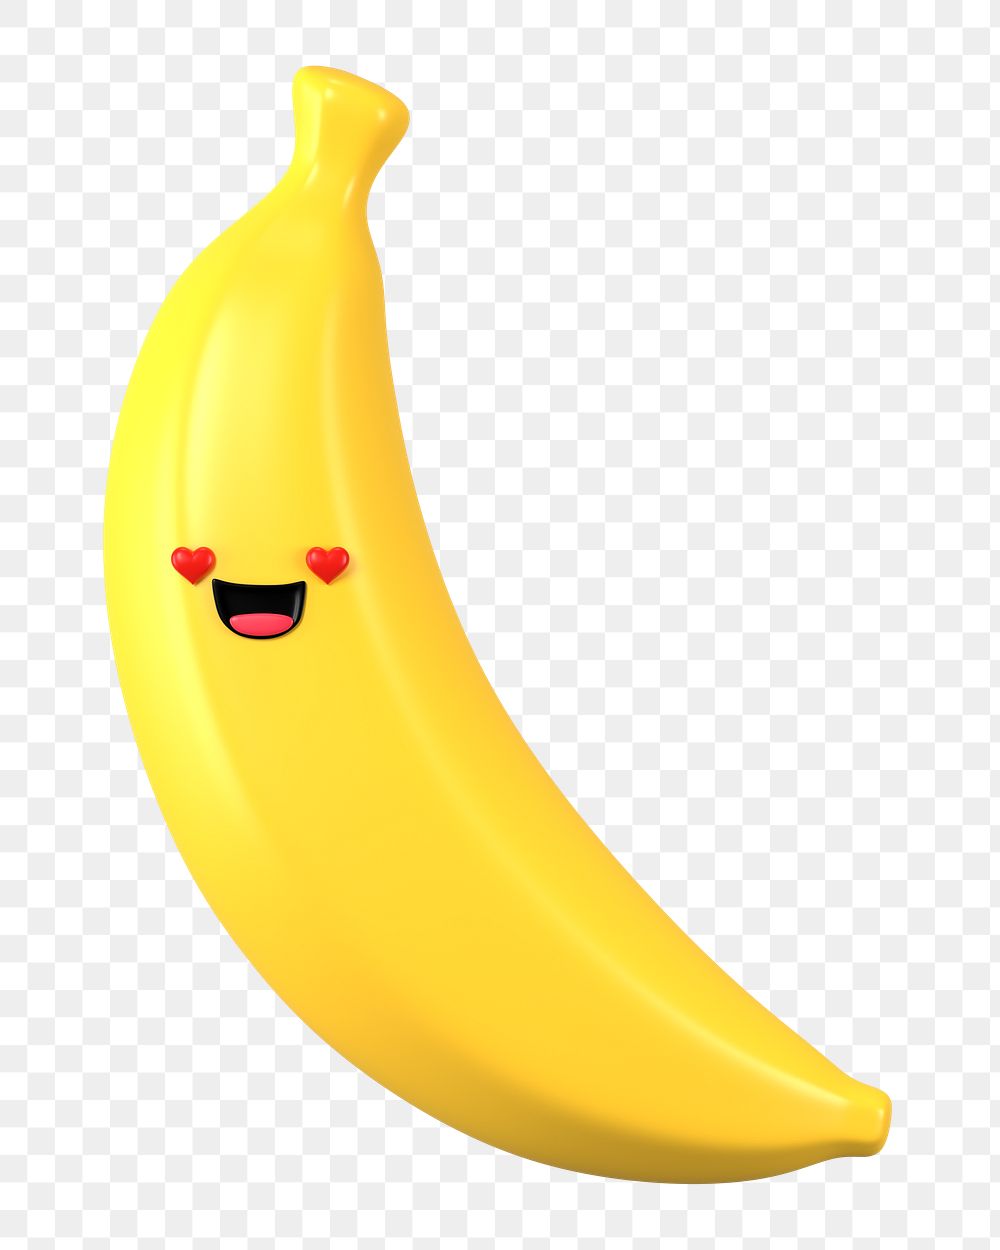 3D banana png in love emoticon, transparent background